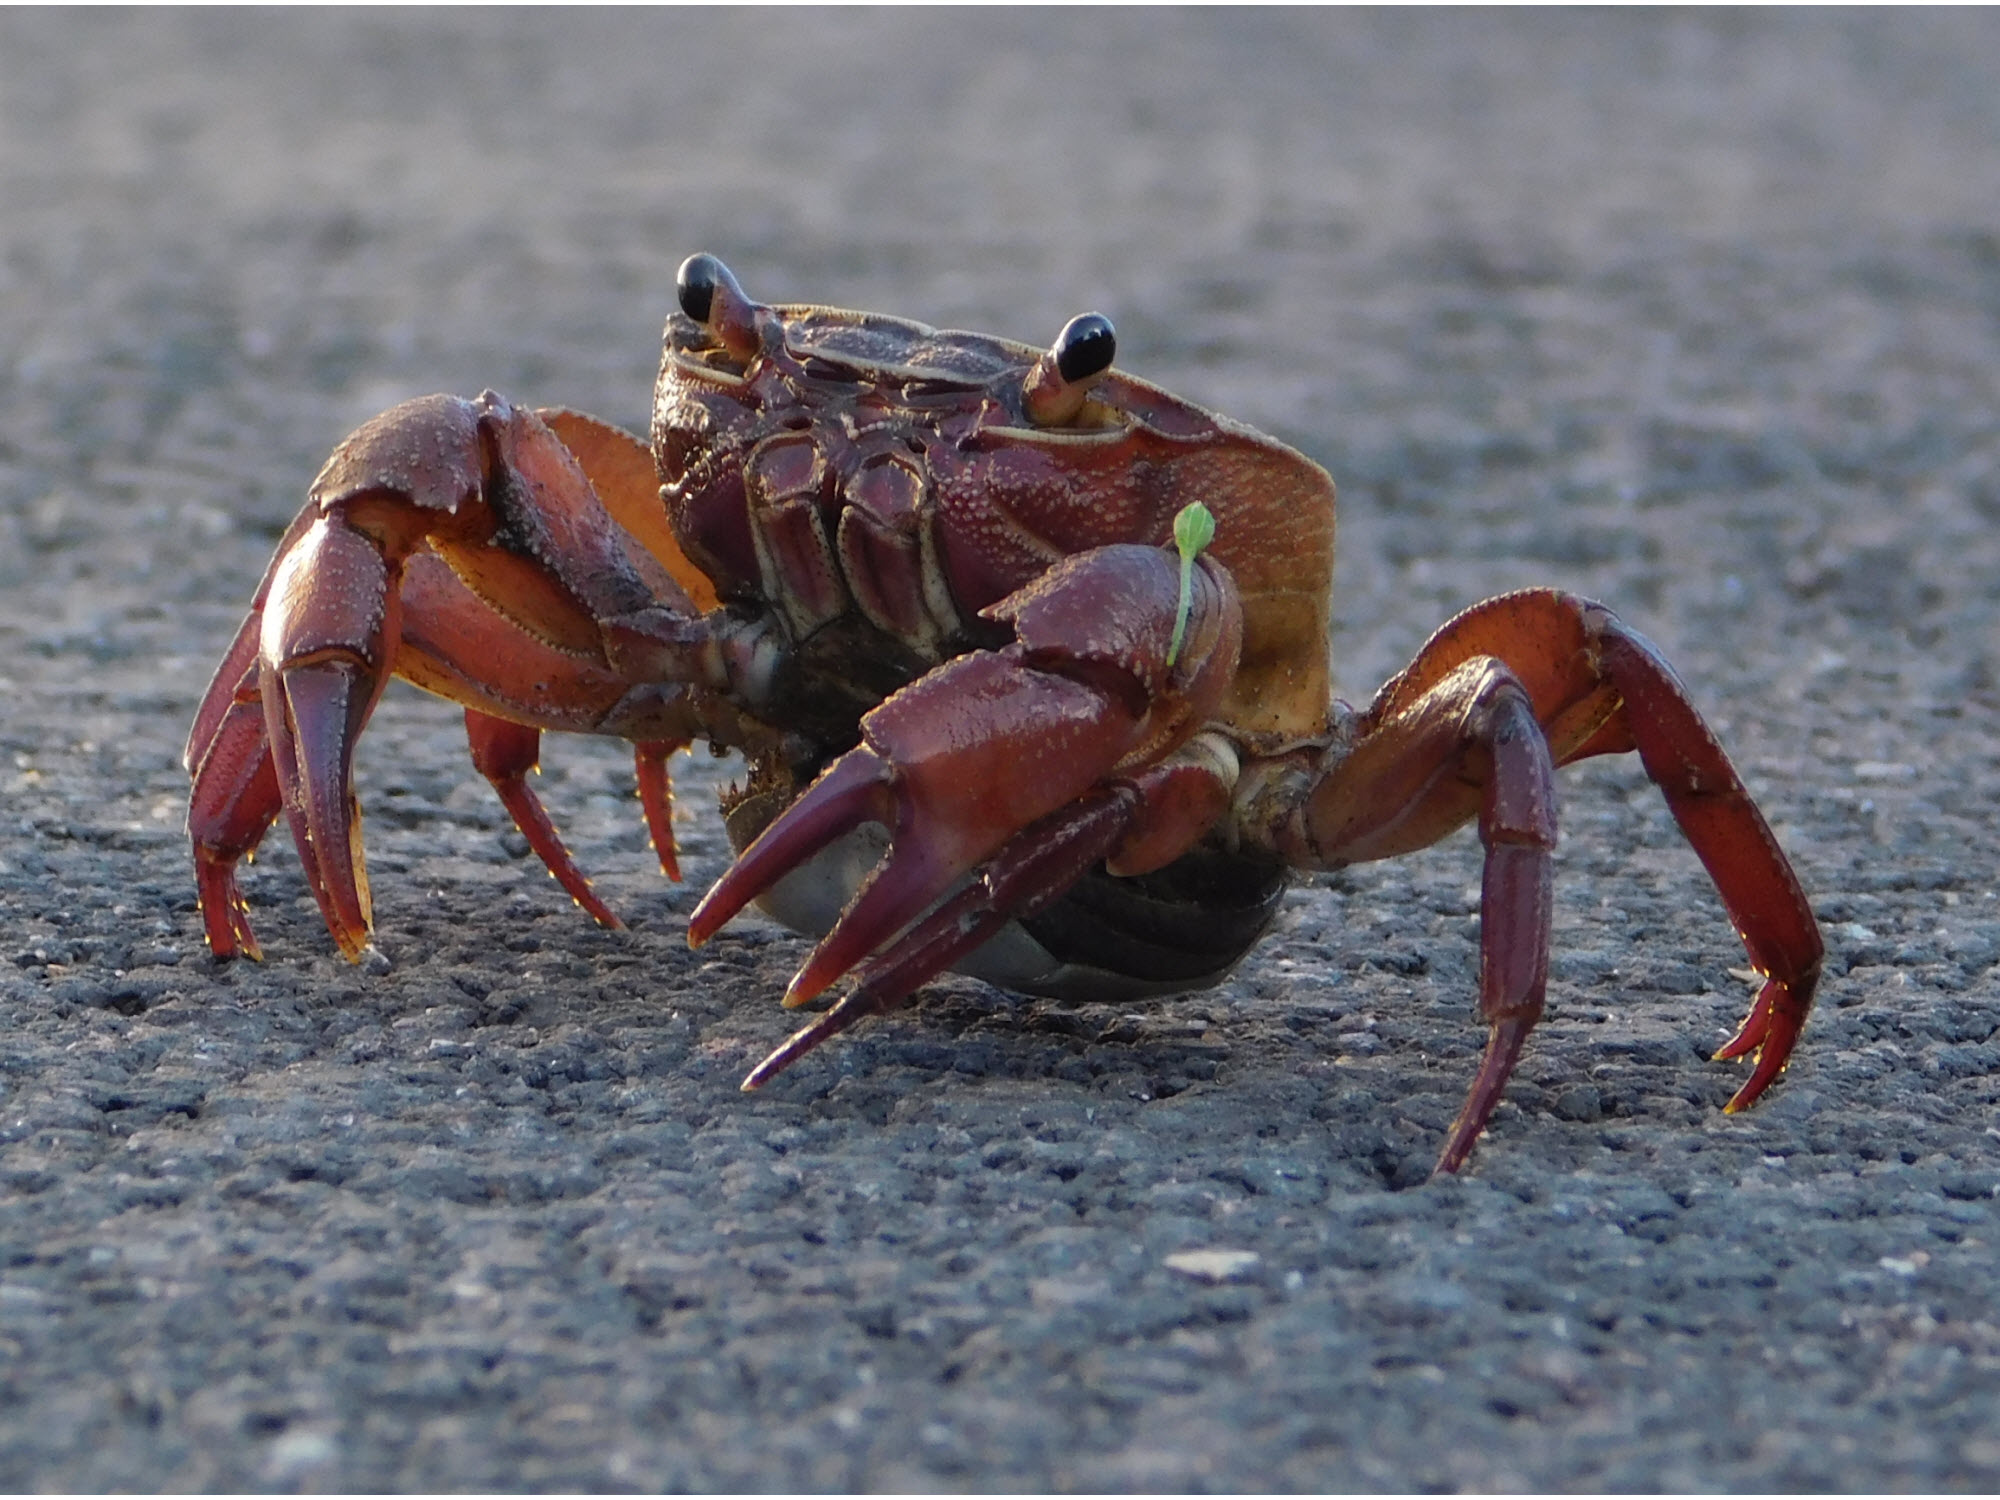 Land crab in the road